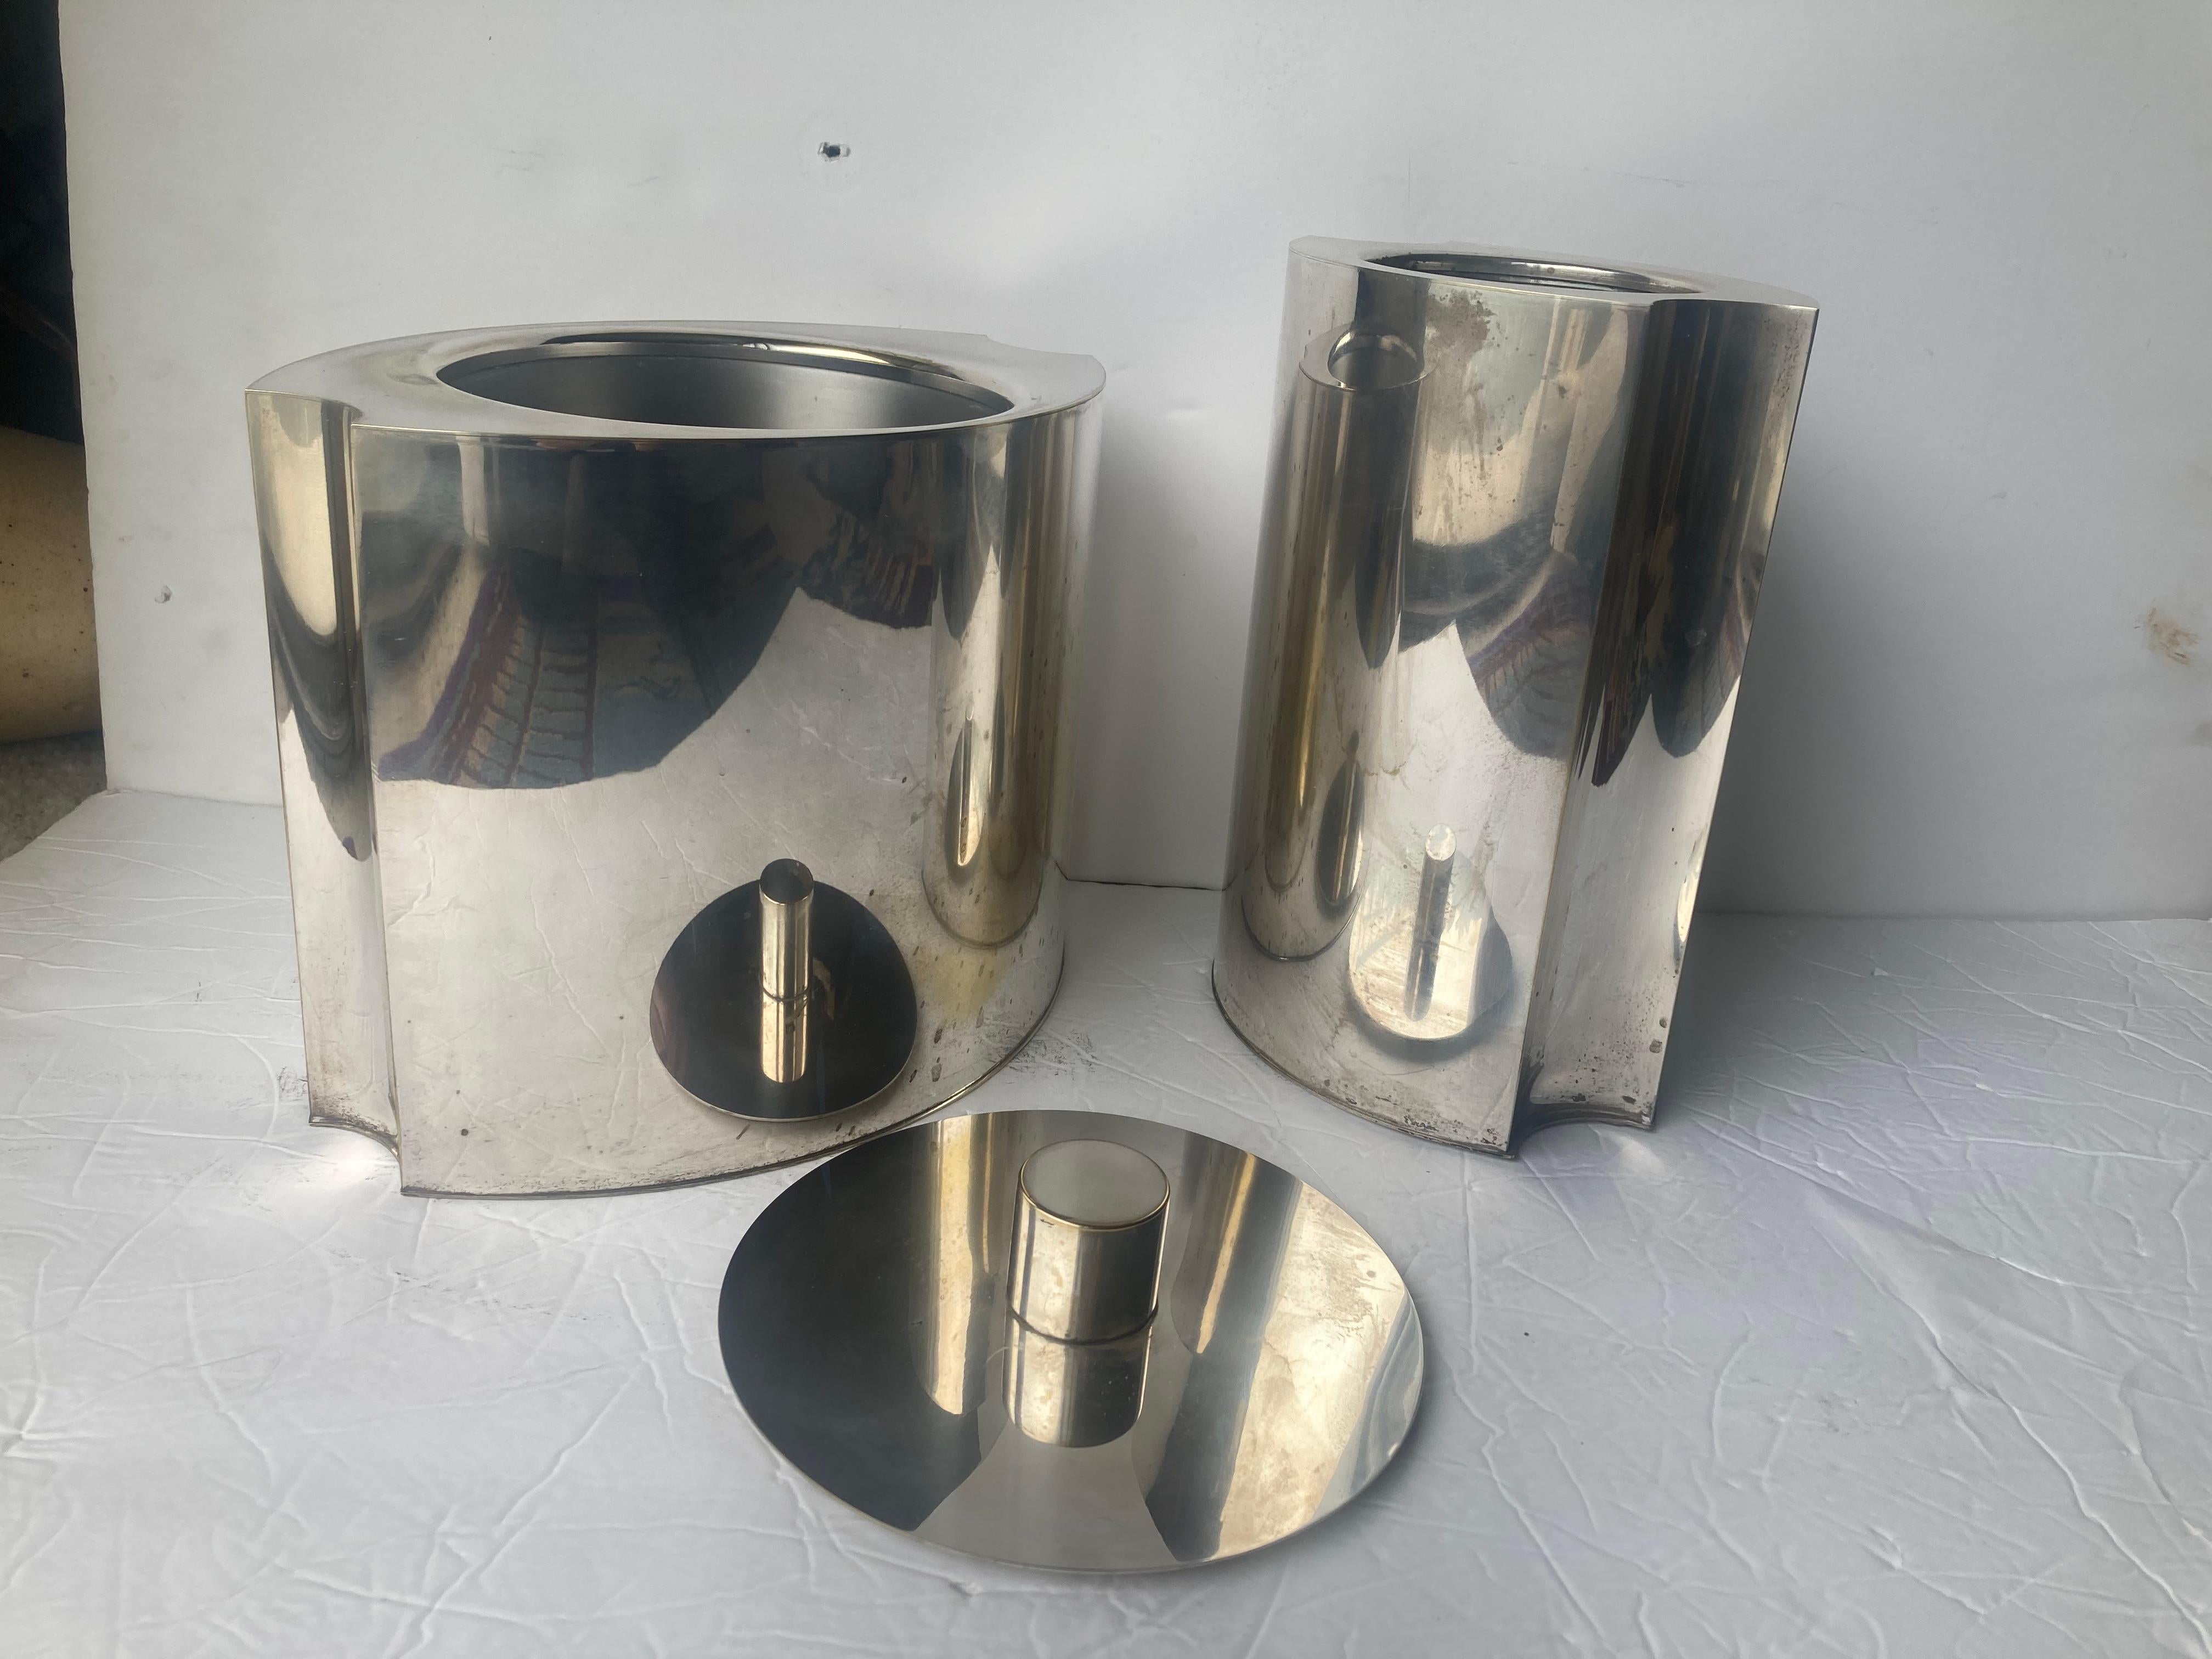 Christian Dior Home , rare set 2 Ice Bucket and Wine bottle cooler silver plate  In Fair Condition For Sale In Los Angeles, CA